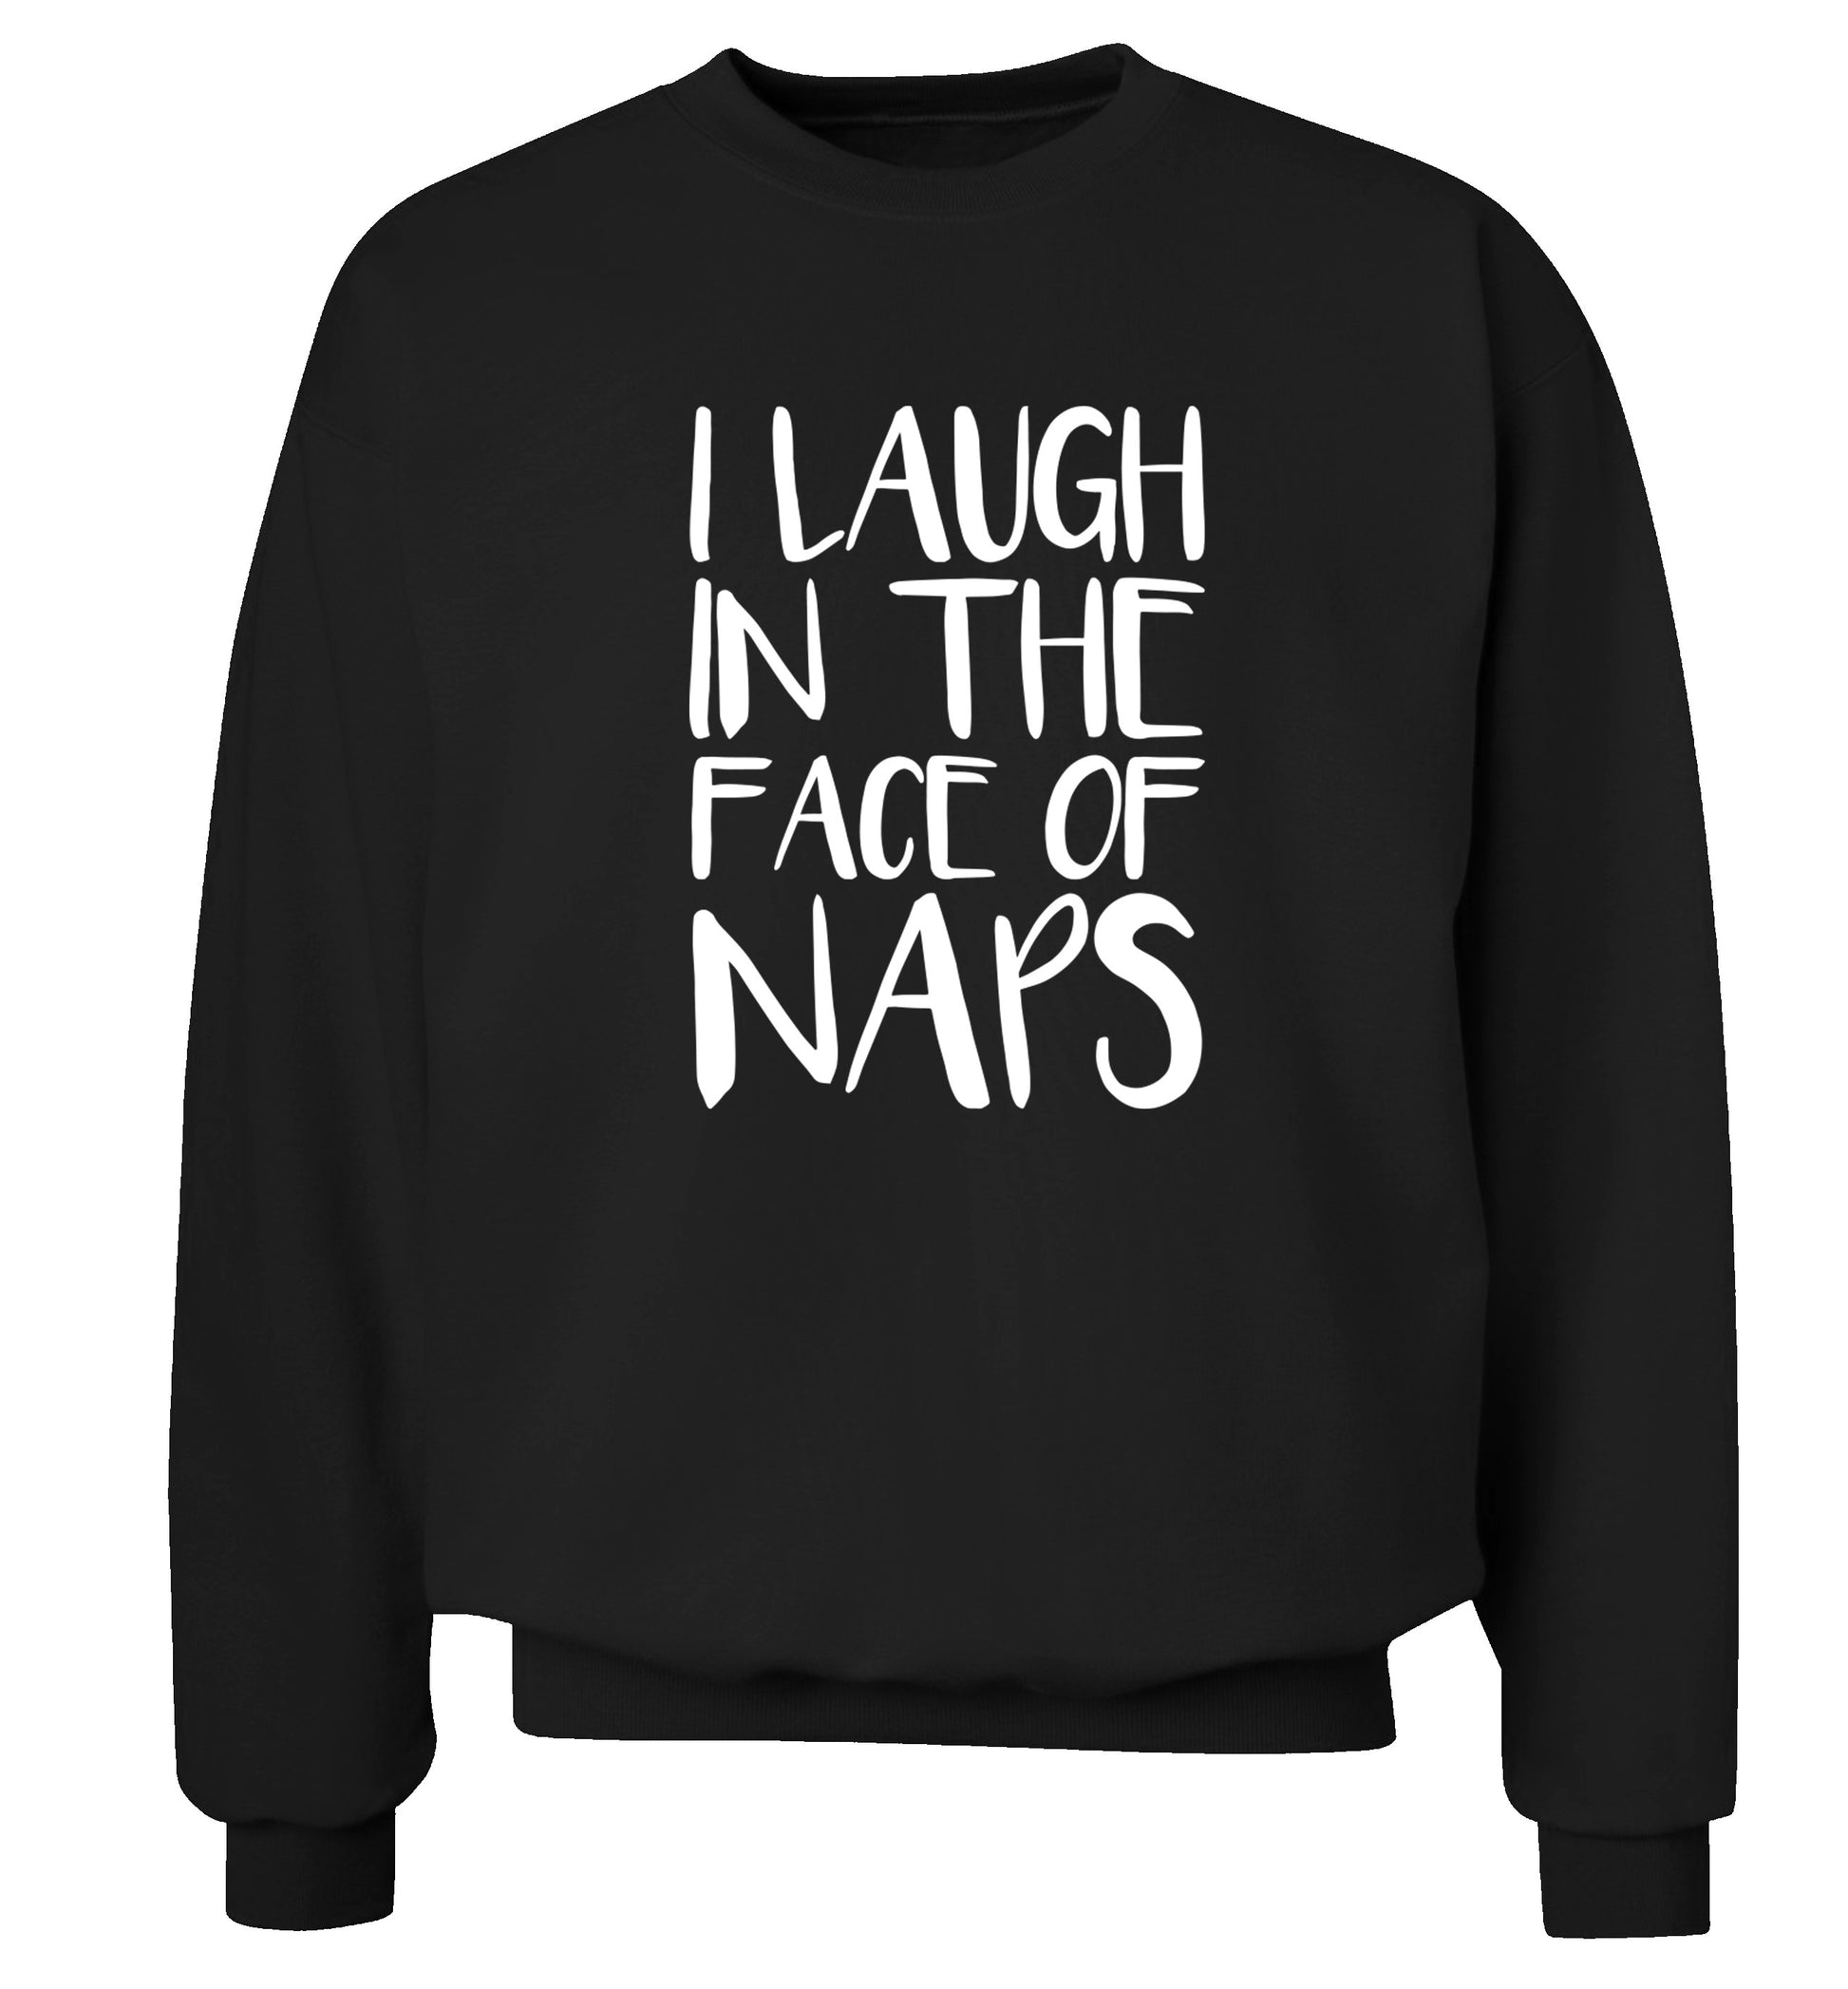 I laugh in the face of naps Adult's unisex black Sweater 2XL